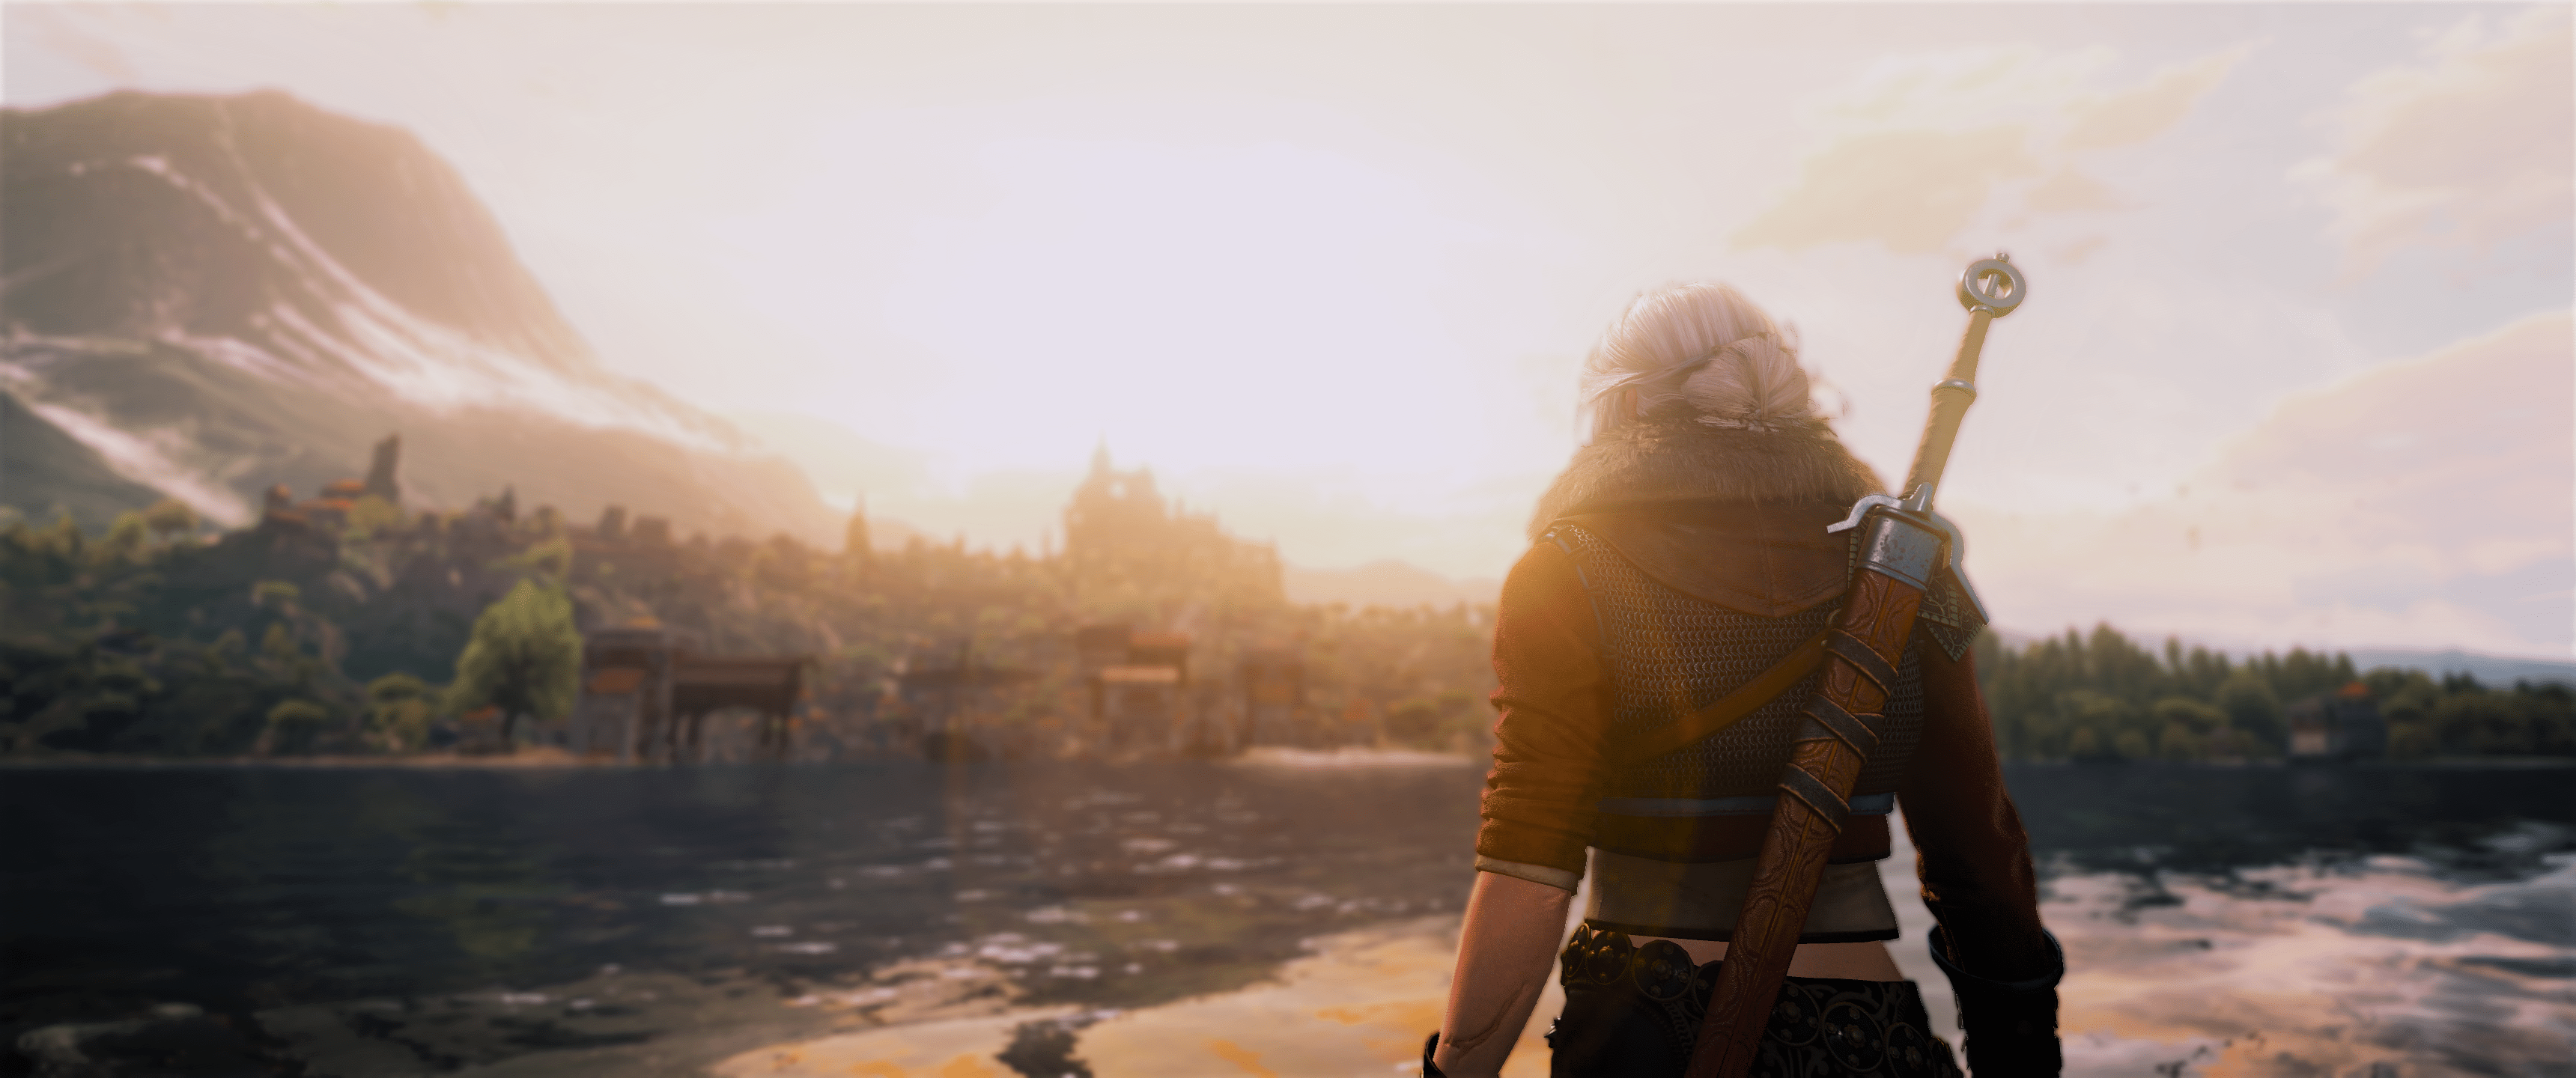 3440X1440 Witcher Wallpapers - Top Free 3440X1440 Witcher Backgrounds